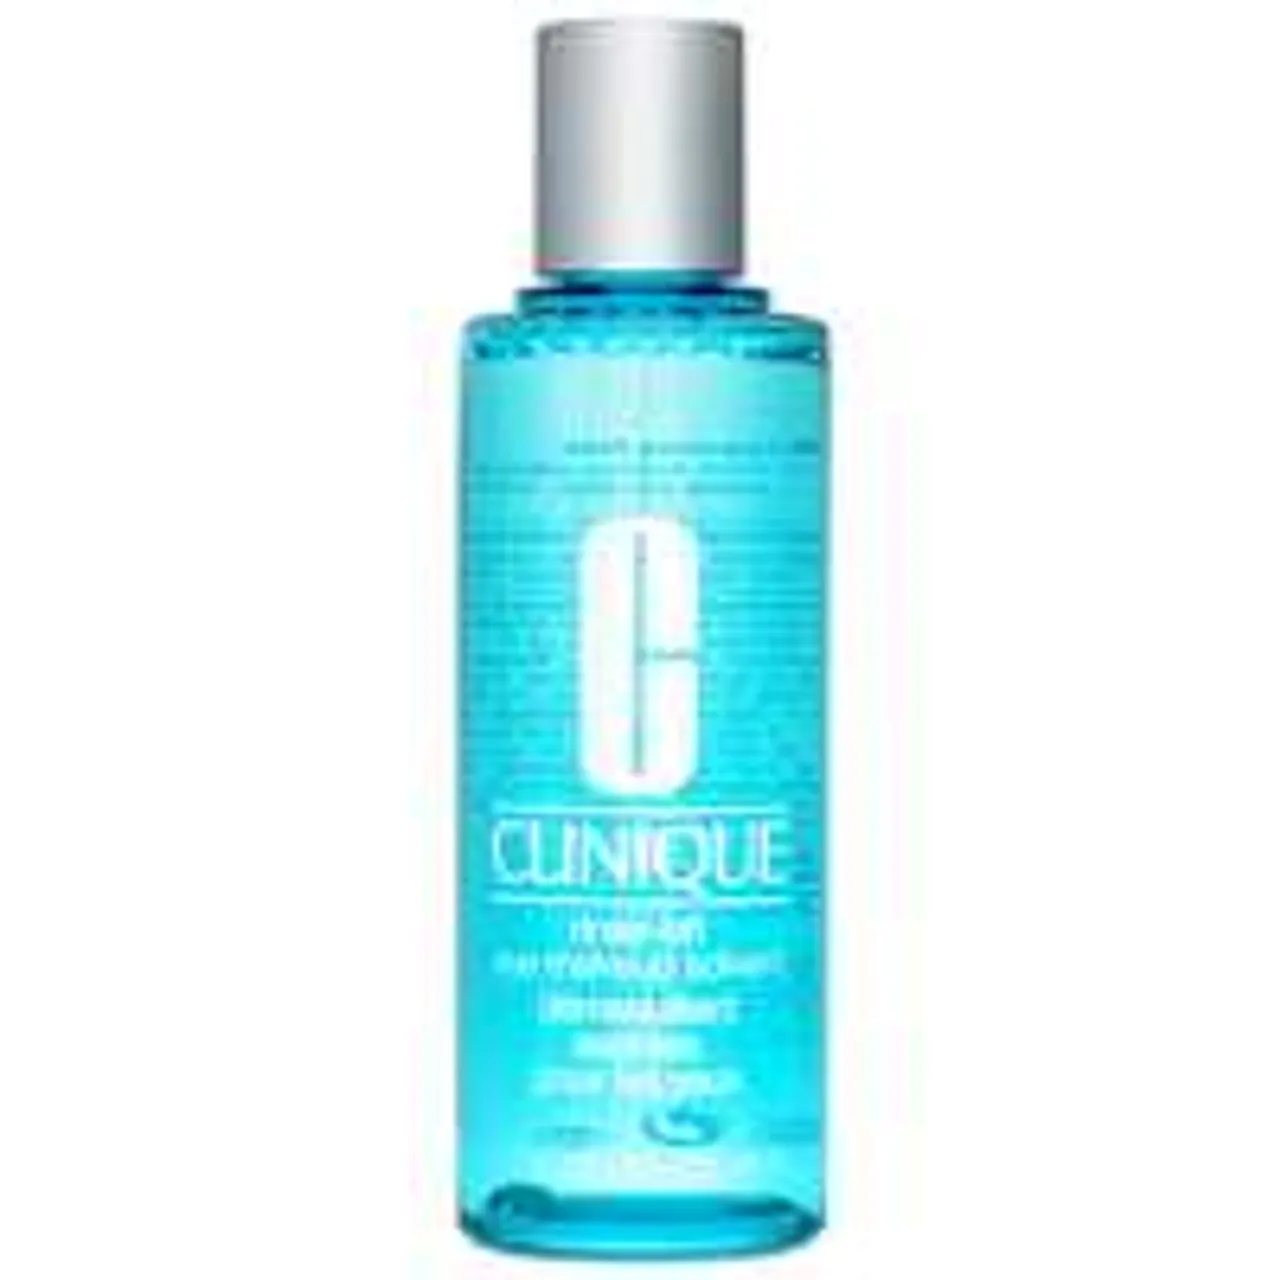 Clinique Eye and Lip Care Rinse-Off Eye Makeup Solvent 125ml / 4.2 fl.oz.